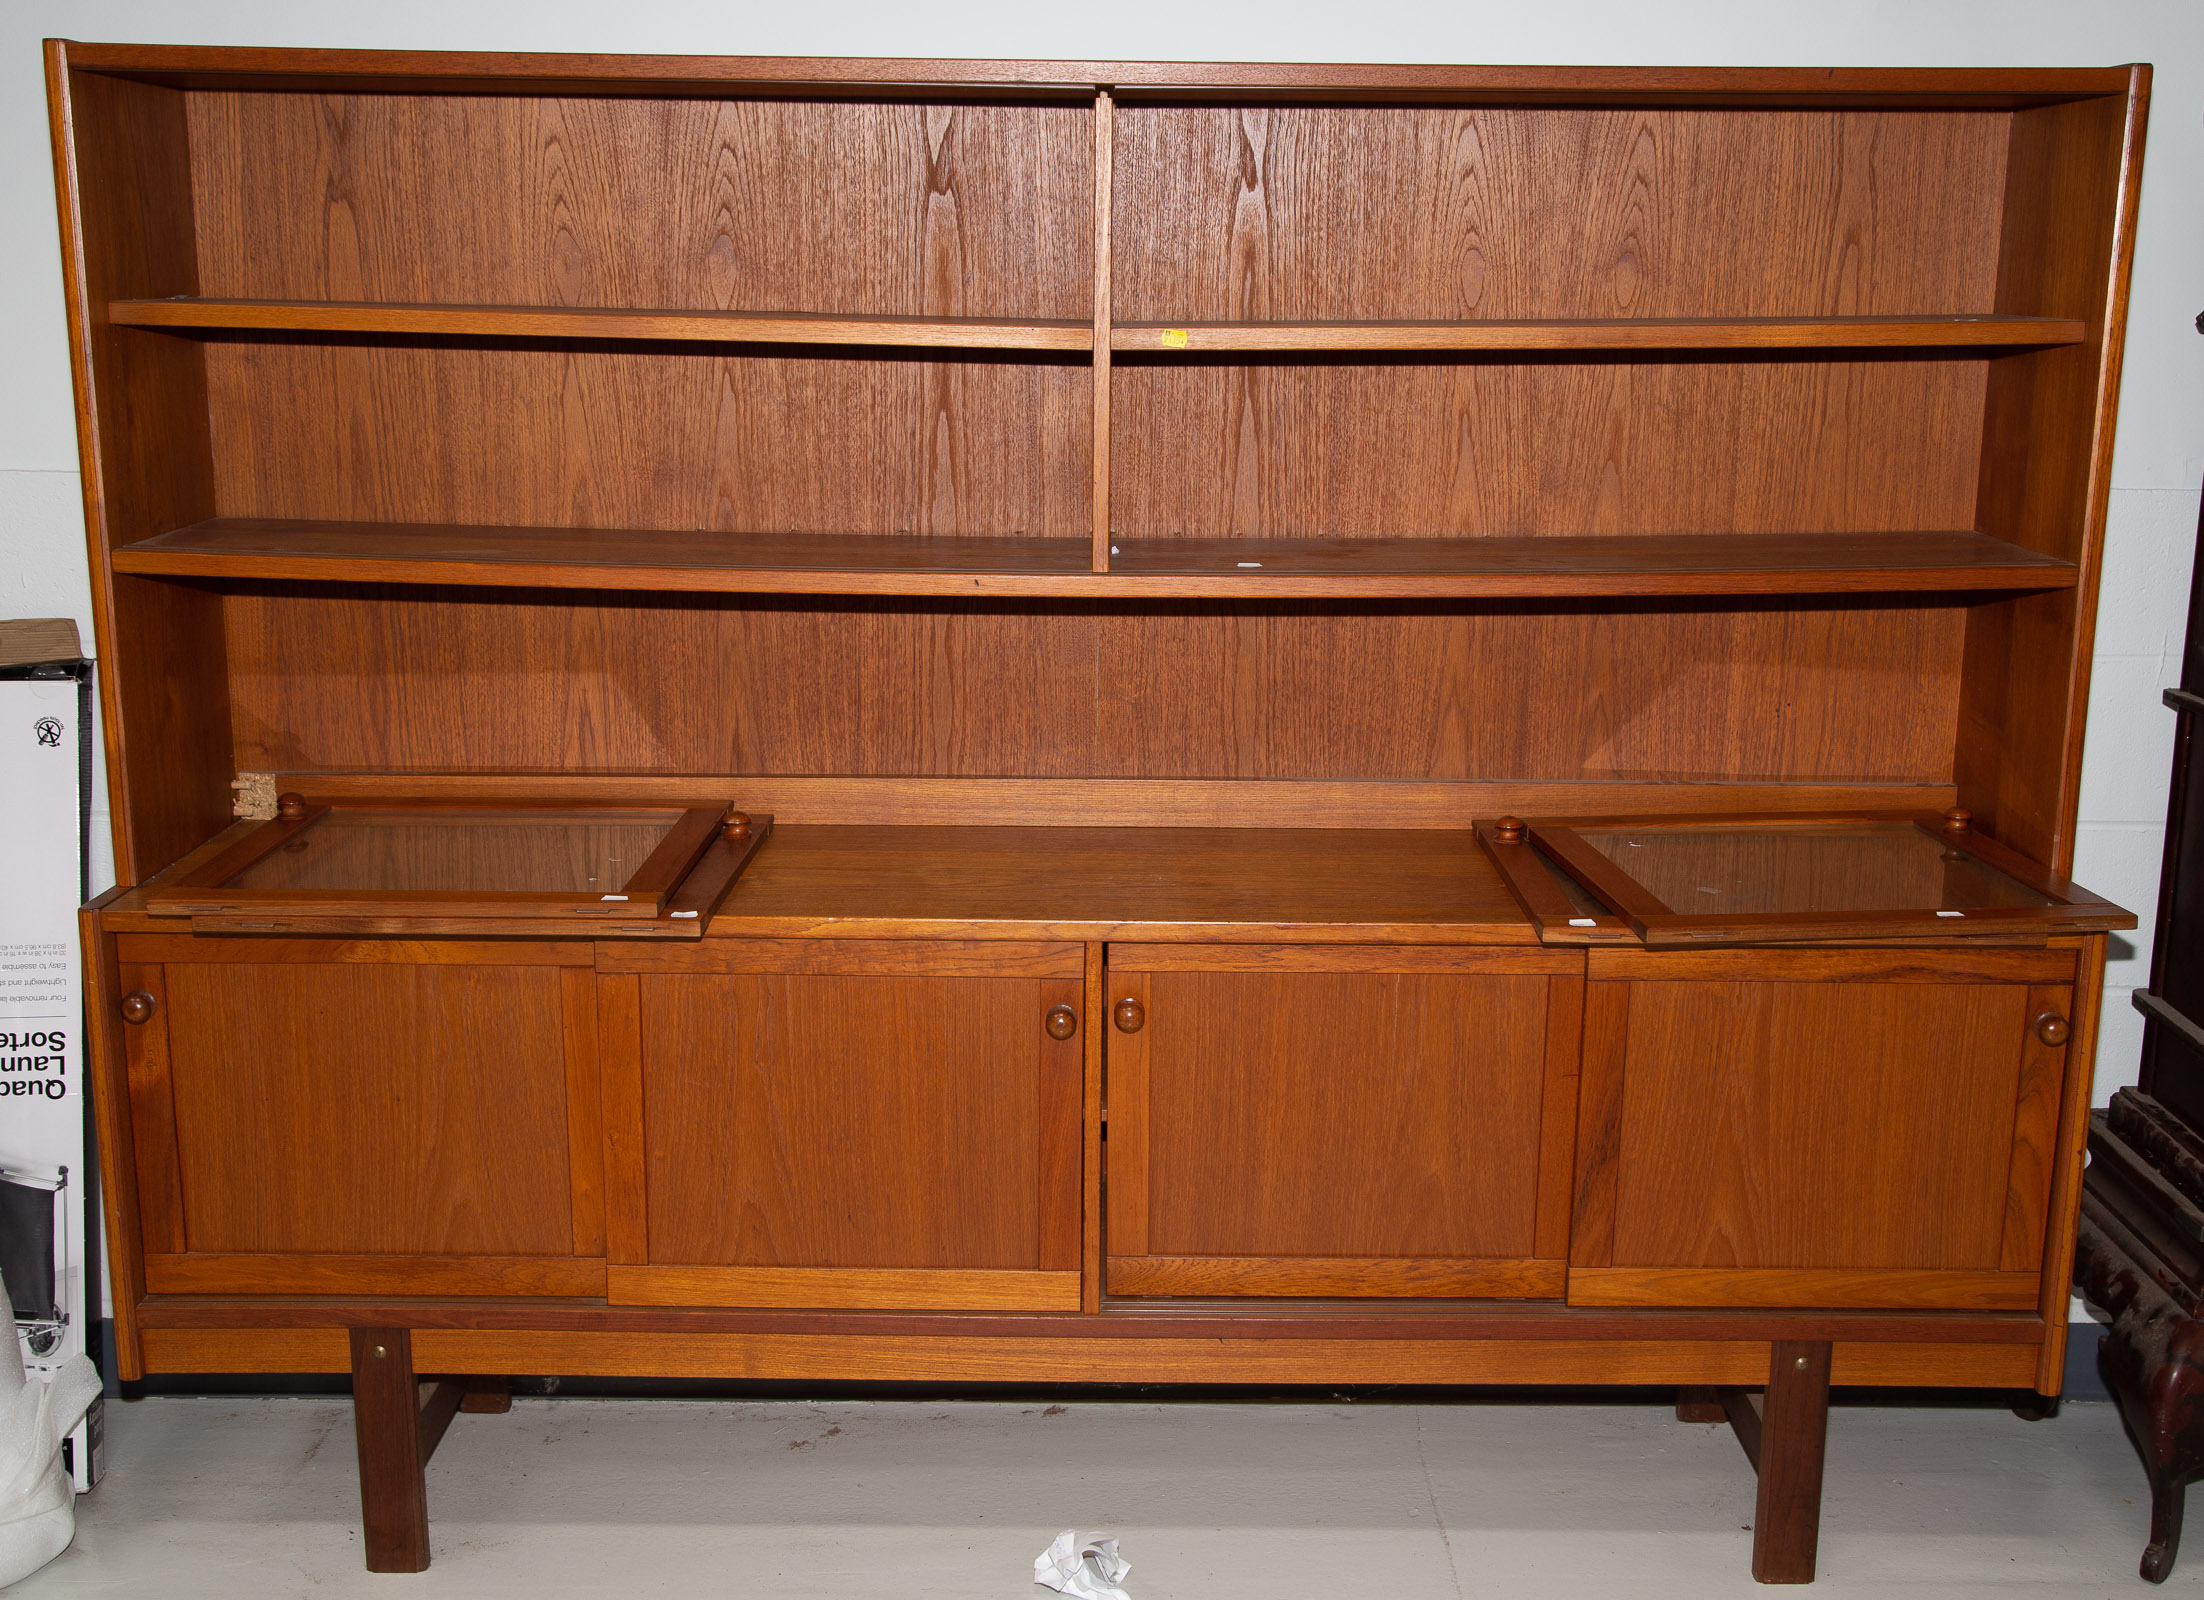 MID CENTURY MODERN WALL UNIT Possibly 288070